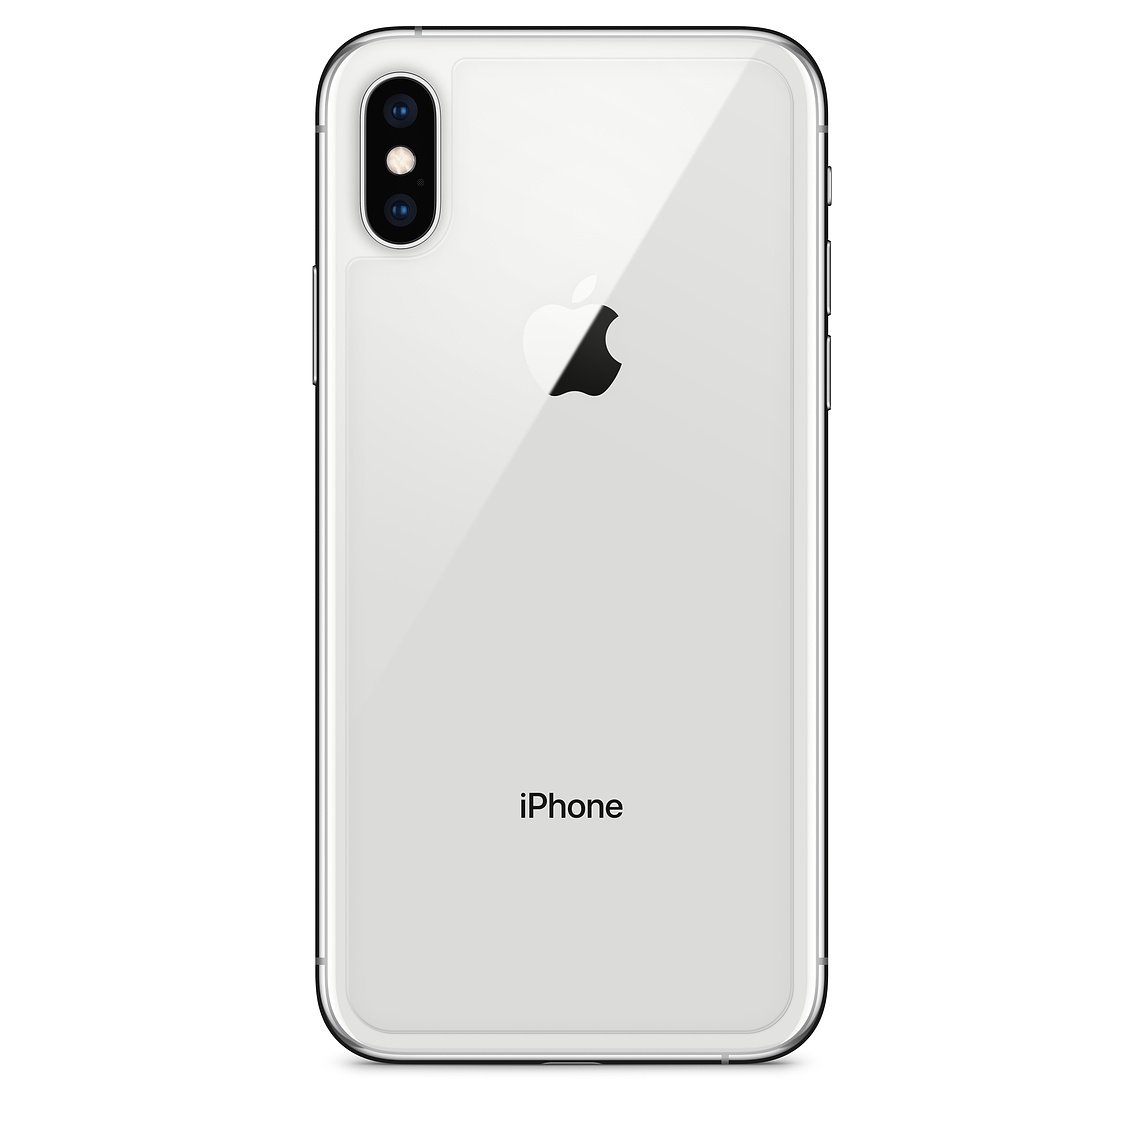 Apple, iPhone X, 64GB, Unlocked to any Network, 12 Months Warranty – 256GB / Silver